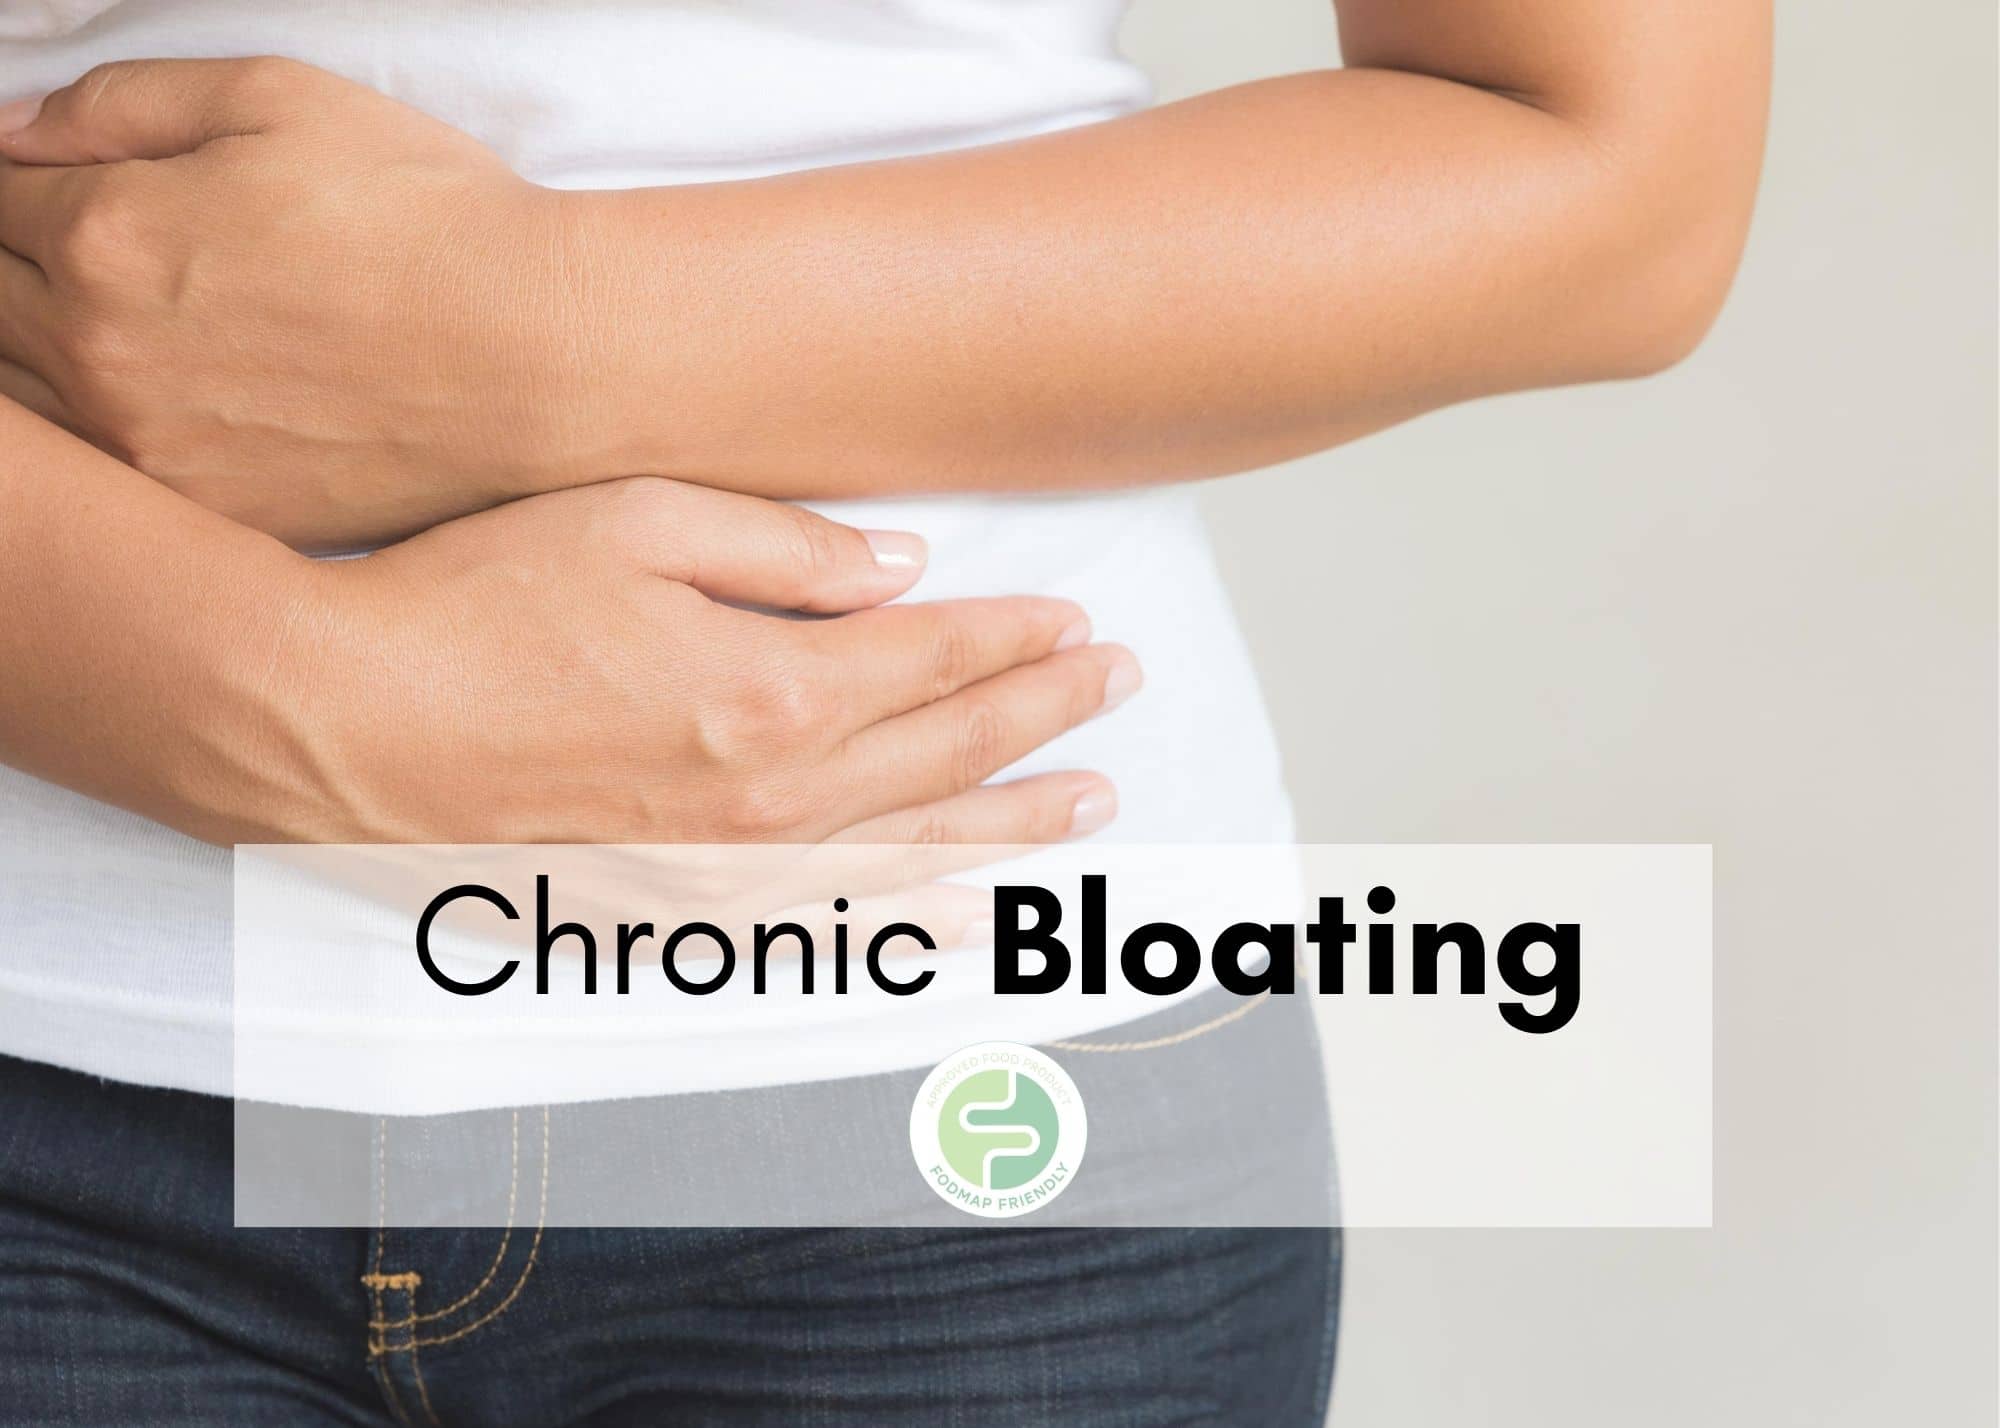 What Is Bloating?